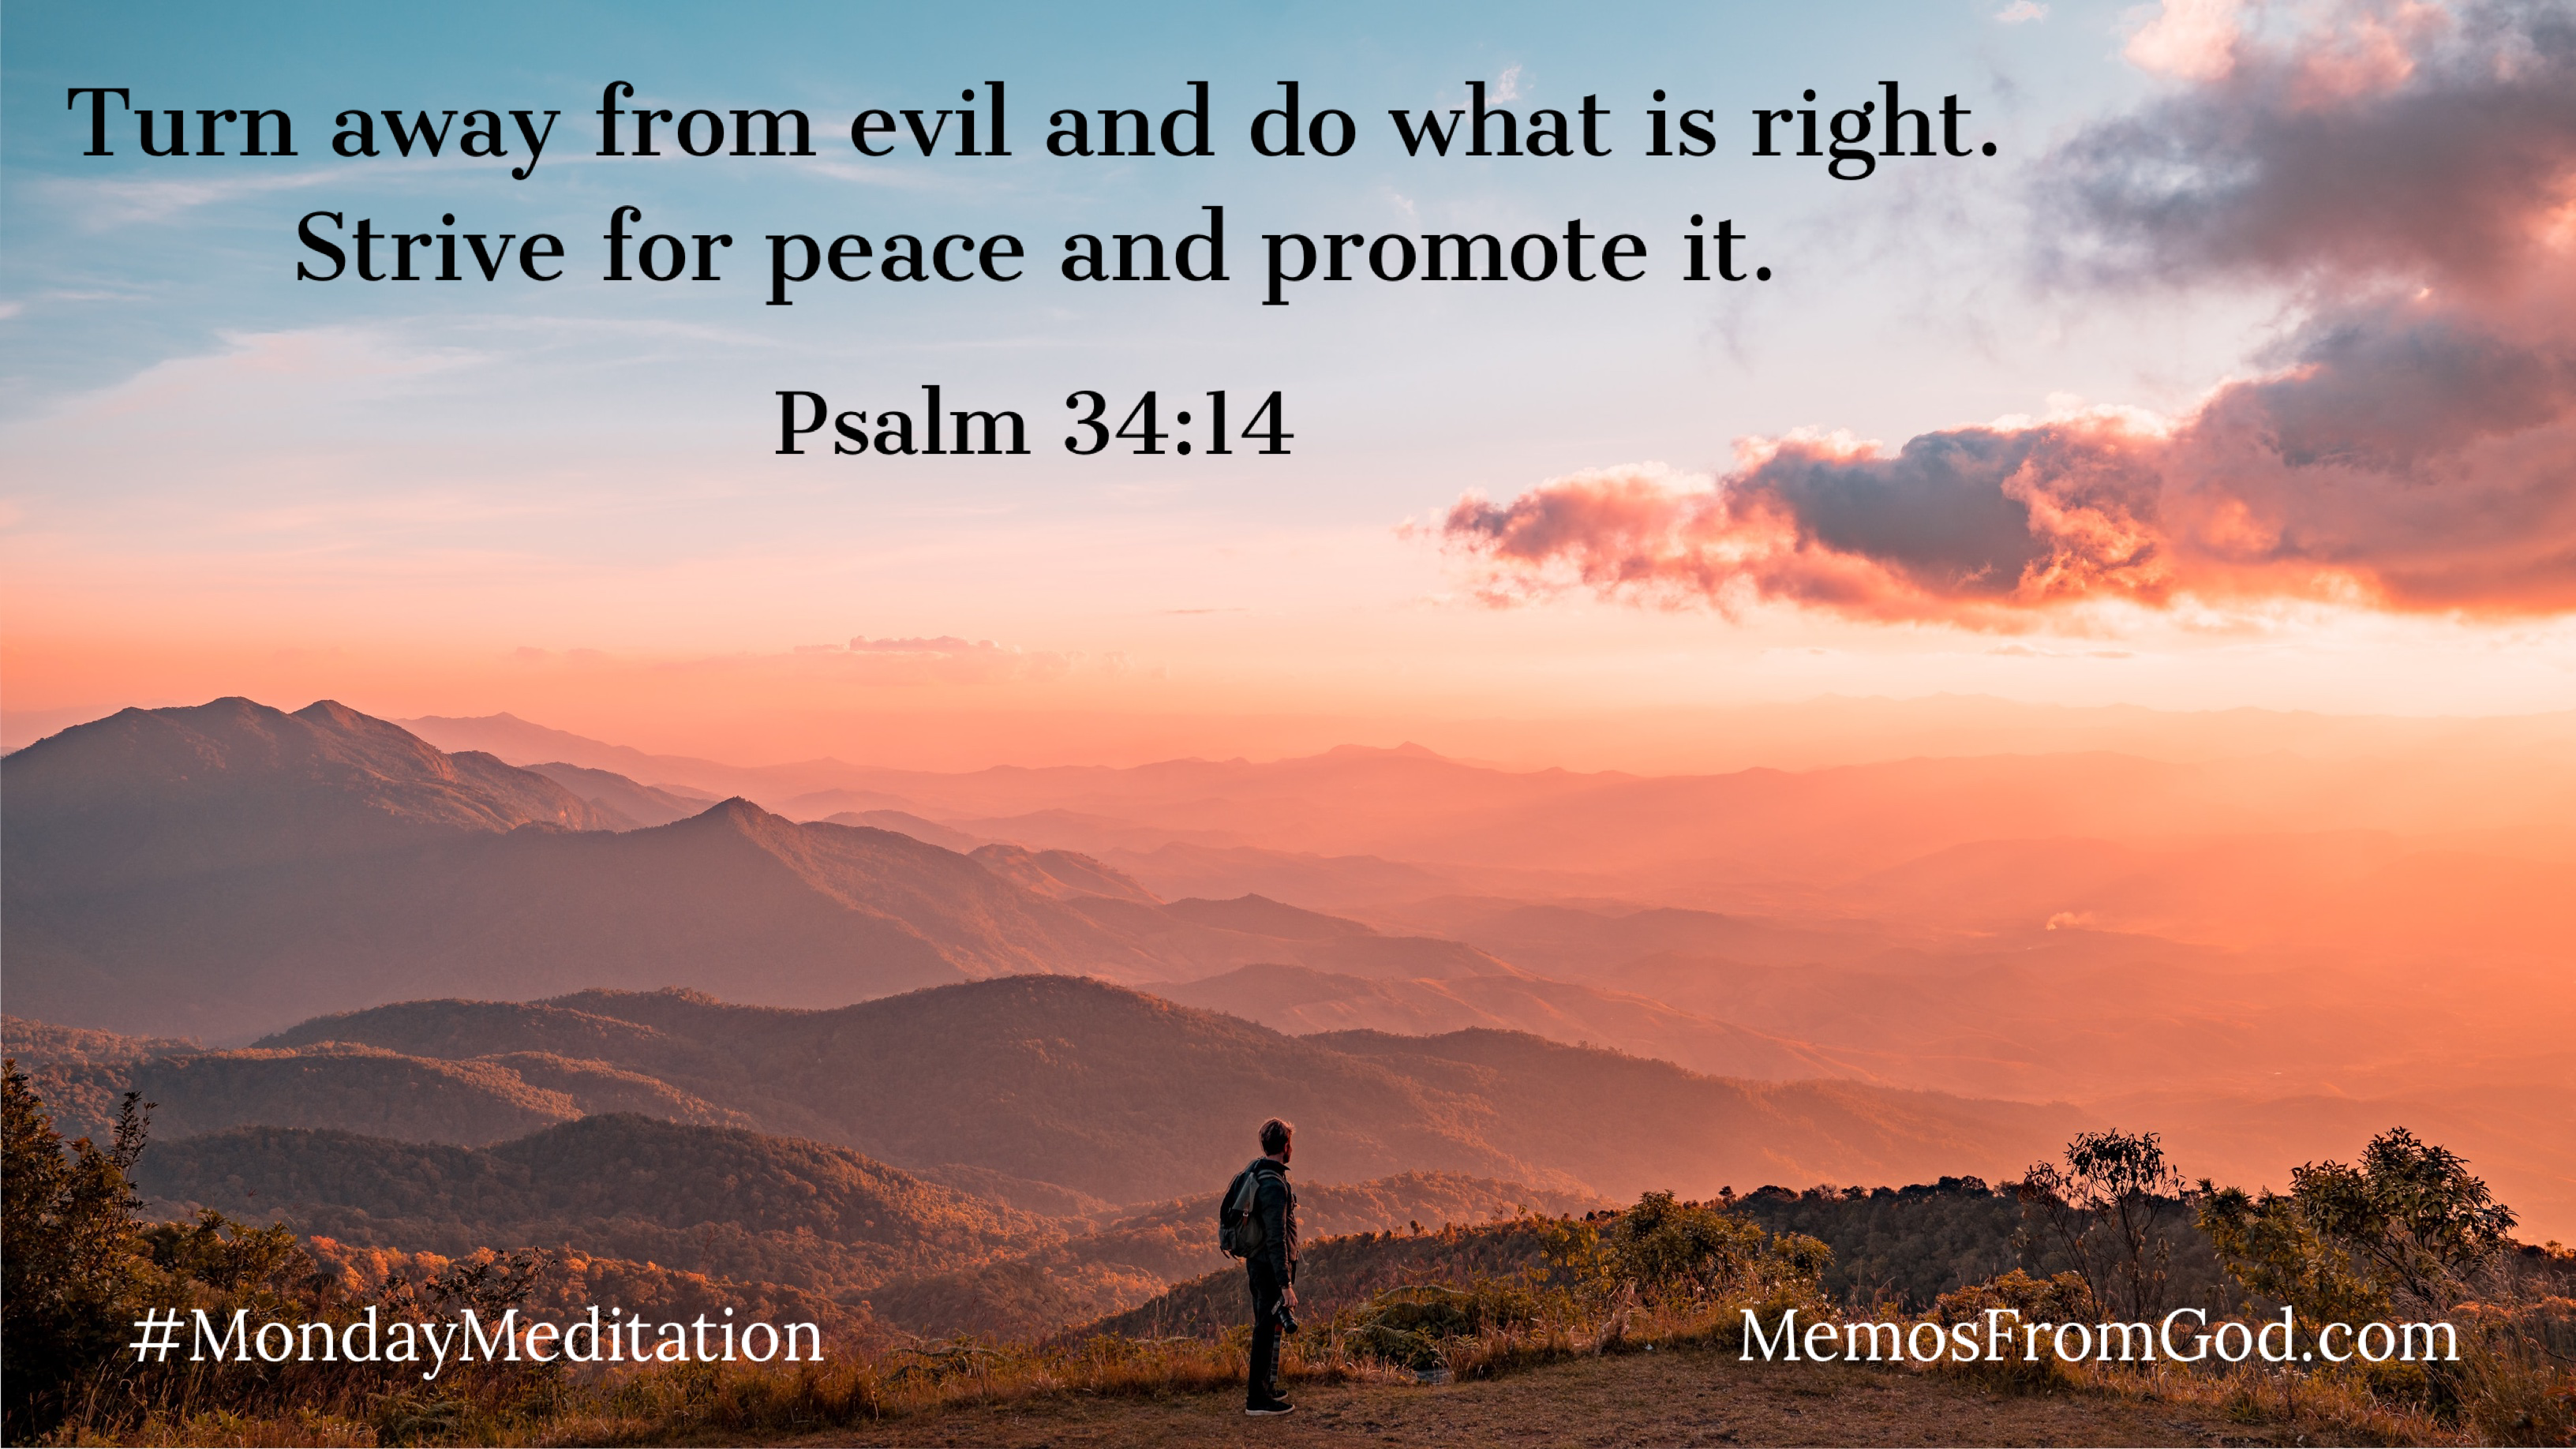 A man in the foreground looking out over mountain tops that are shades of peach in the setting sun. Caption: Turn away from evil and do what is right. Strive for peace and promote it. Psalm 34:14